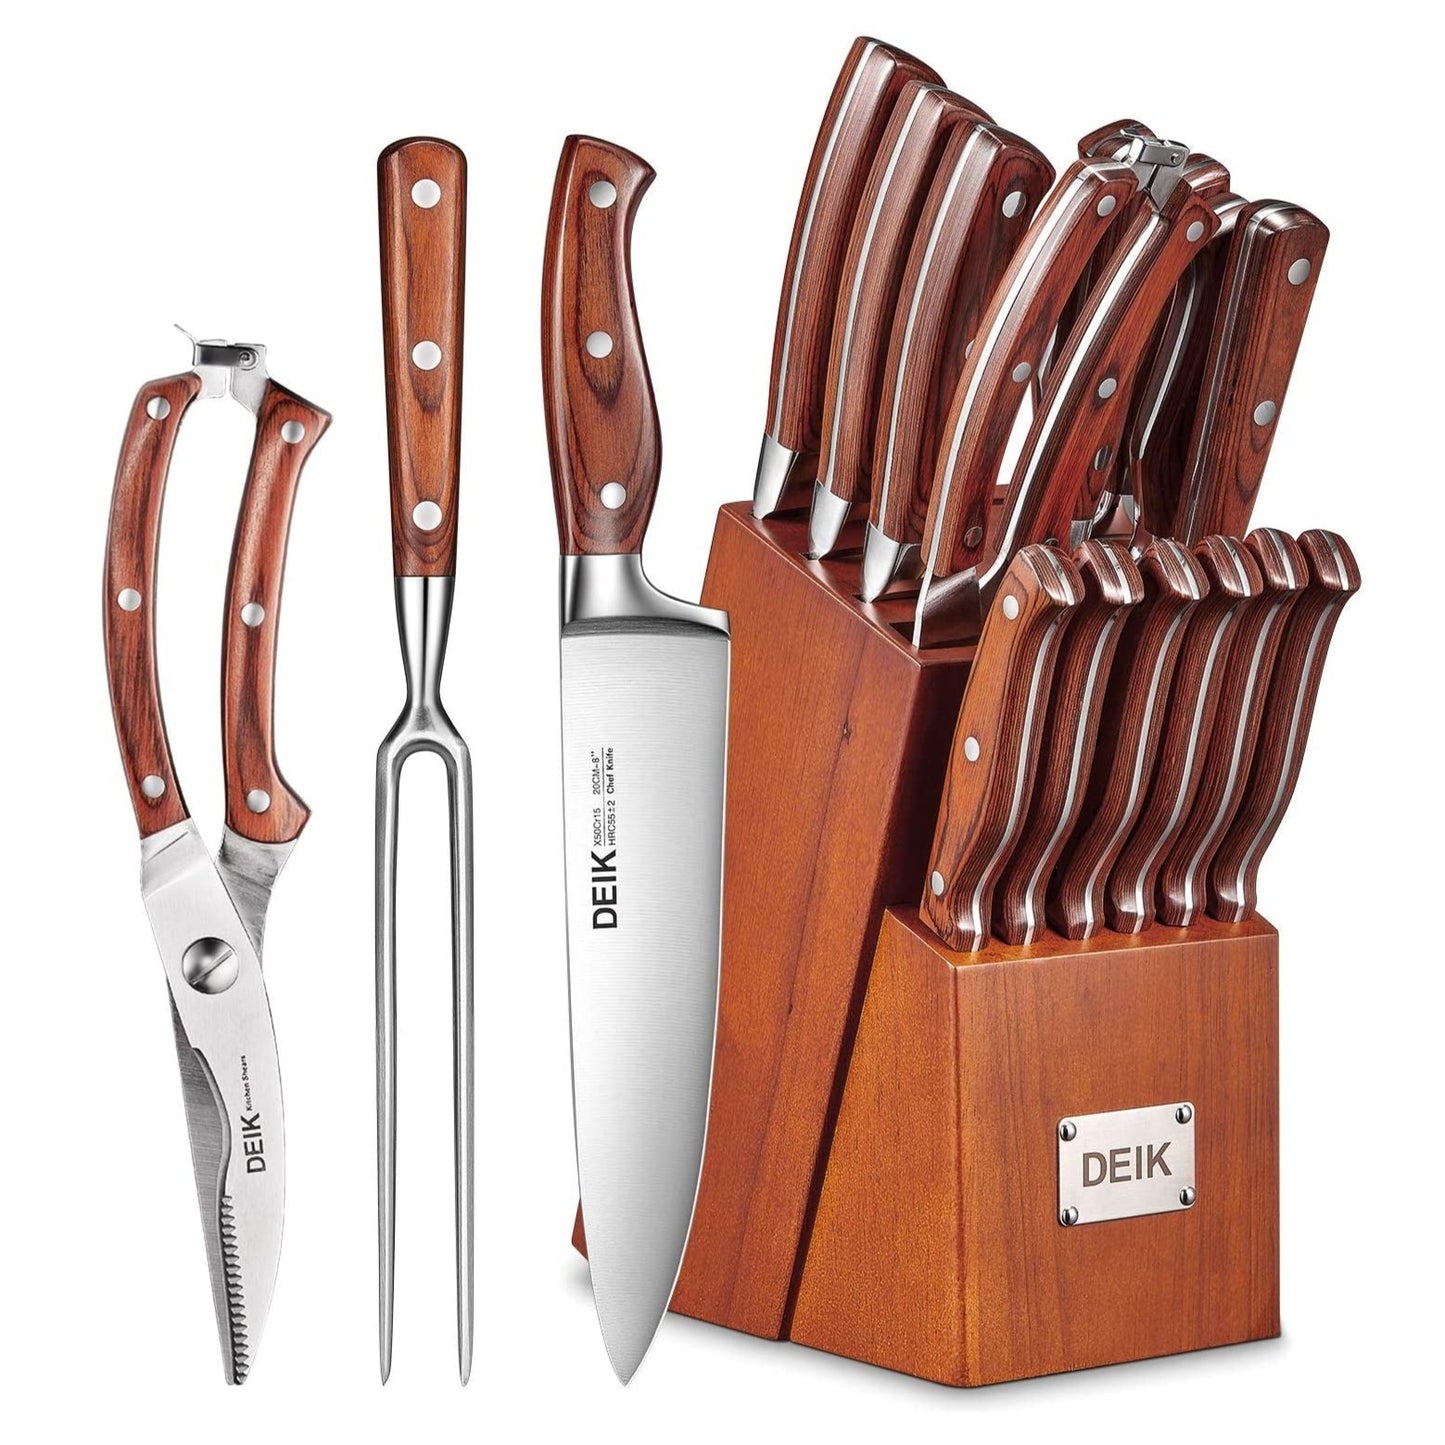 DEIK High-Carbon Stainless Steel Knives: 16-pack for cooking